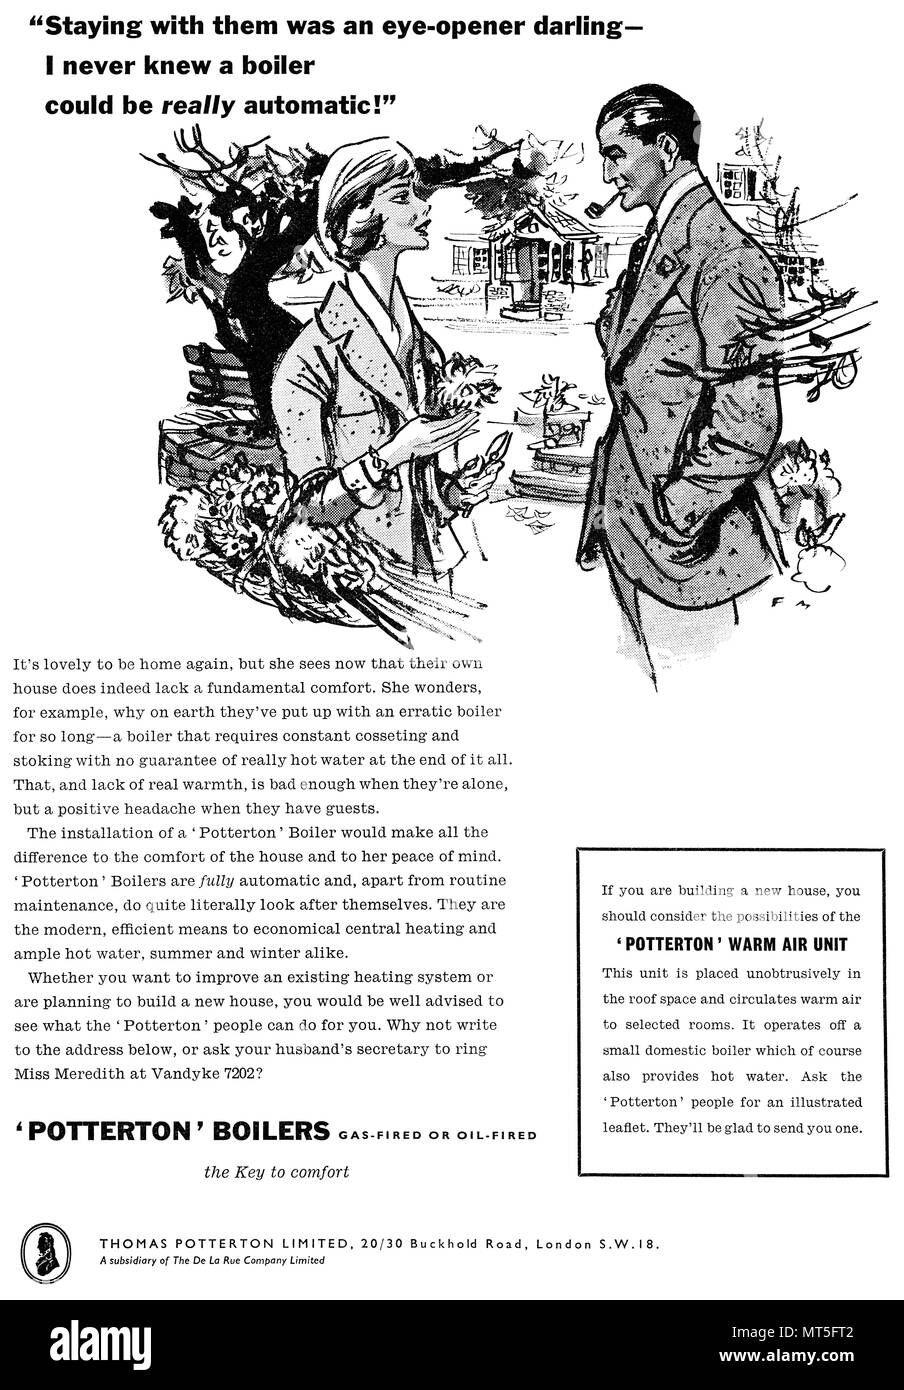 1959 British advertisement for Potterton gas-fired of oil-fired boilers, illustrated by Francis Marshall. Stock Photo